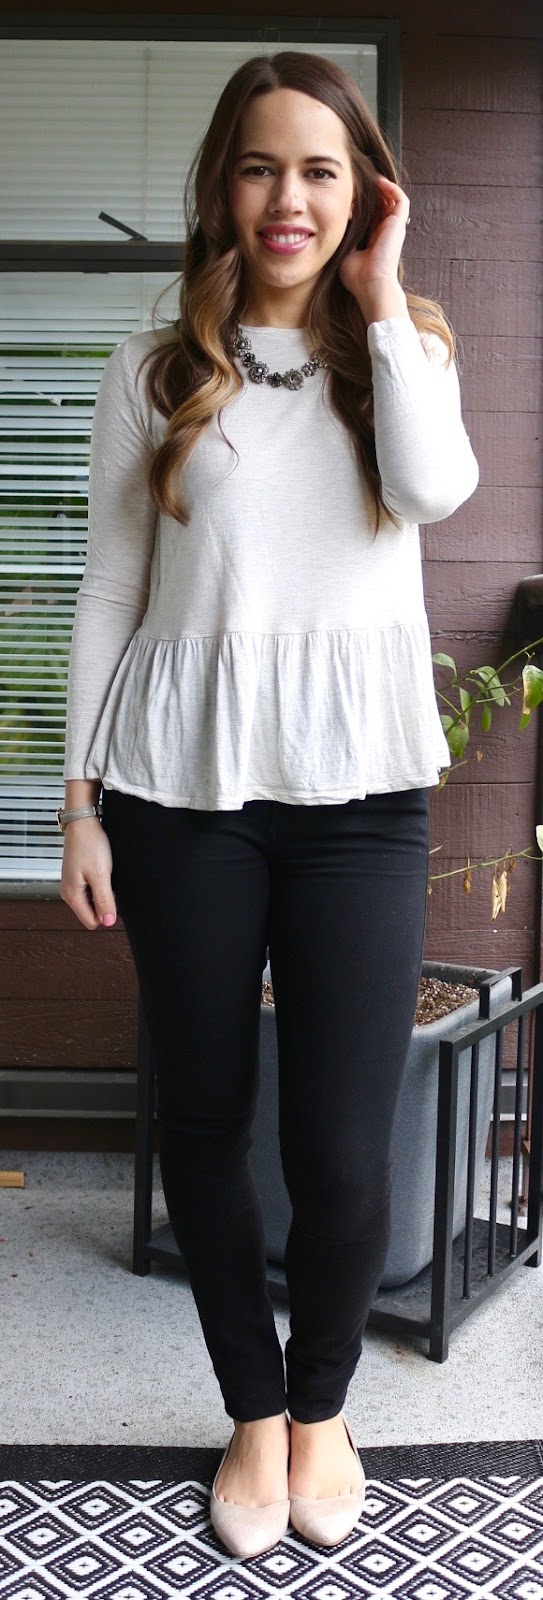 Jules in Flats - Peplum Top and Black Jeans